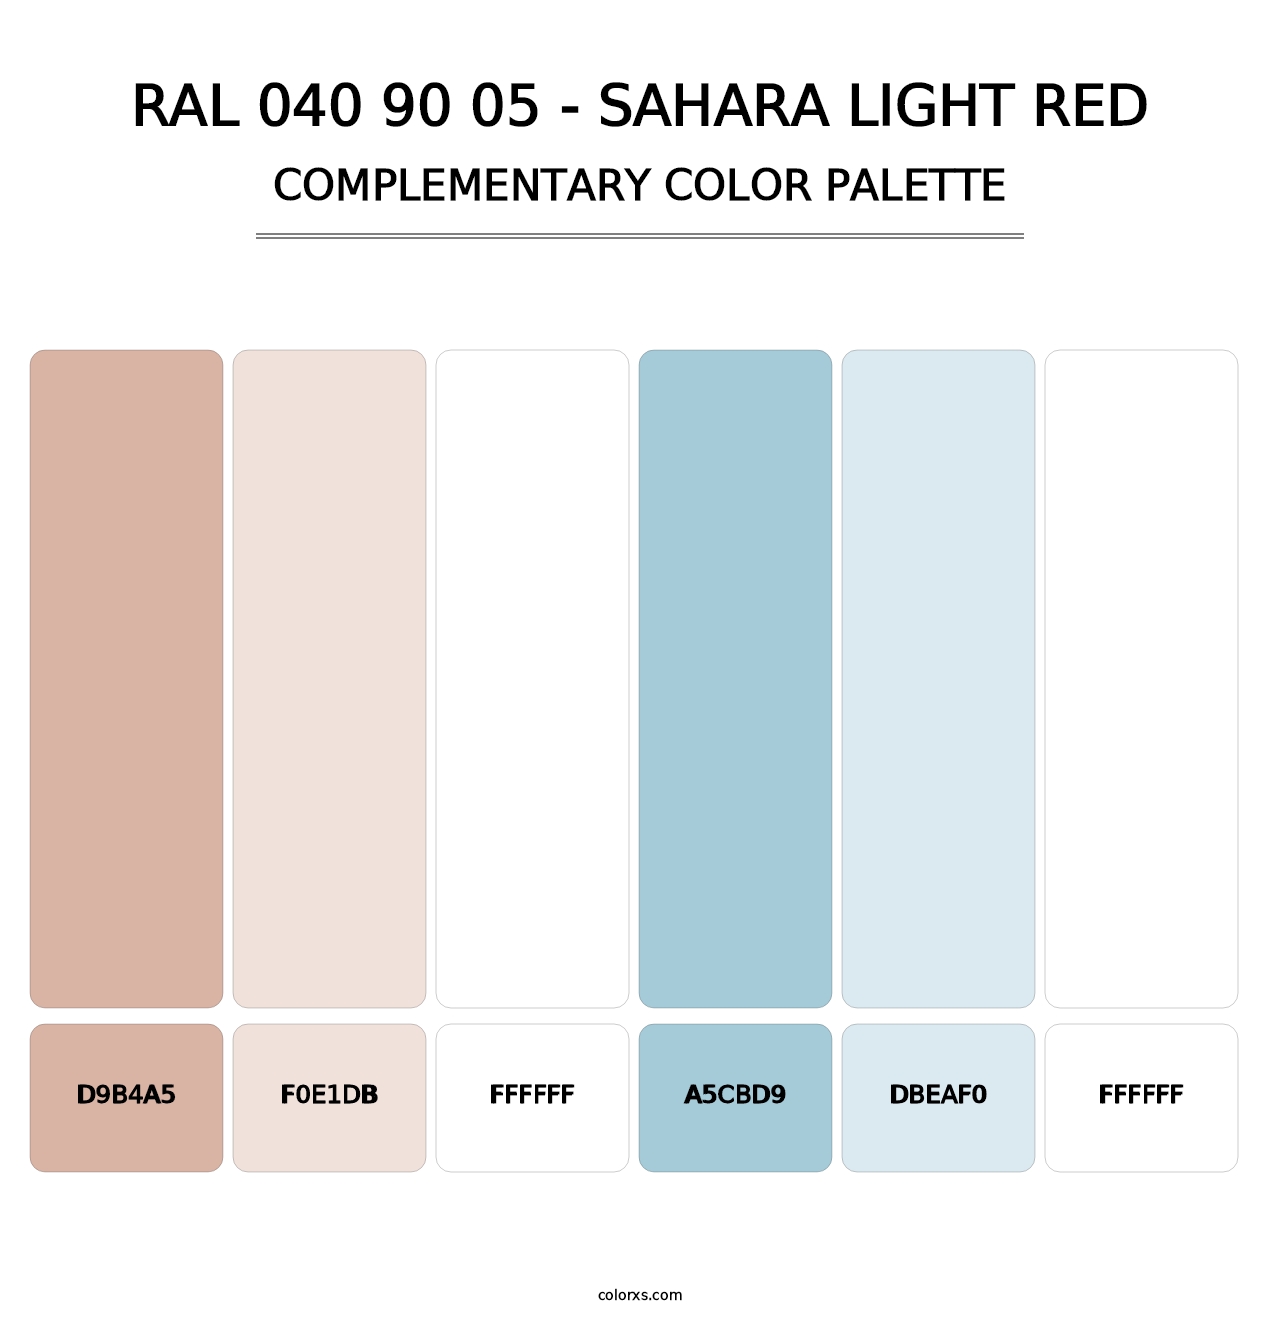 RAL 040 90 05 - Sahara Light Red - Complementary Color Palette